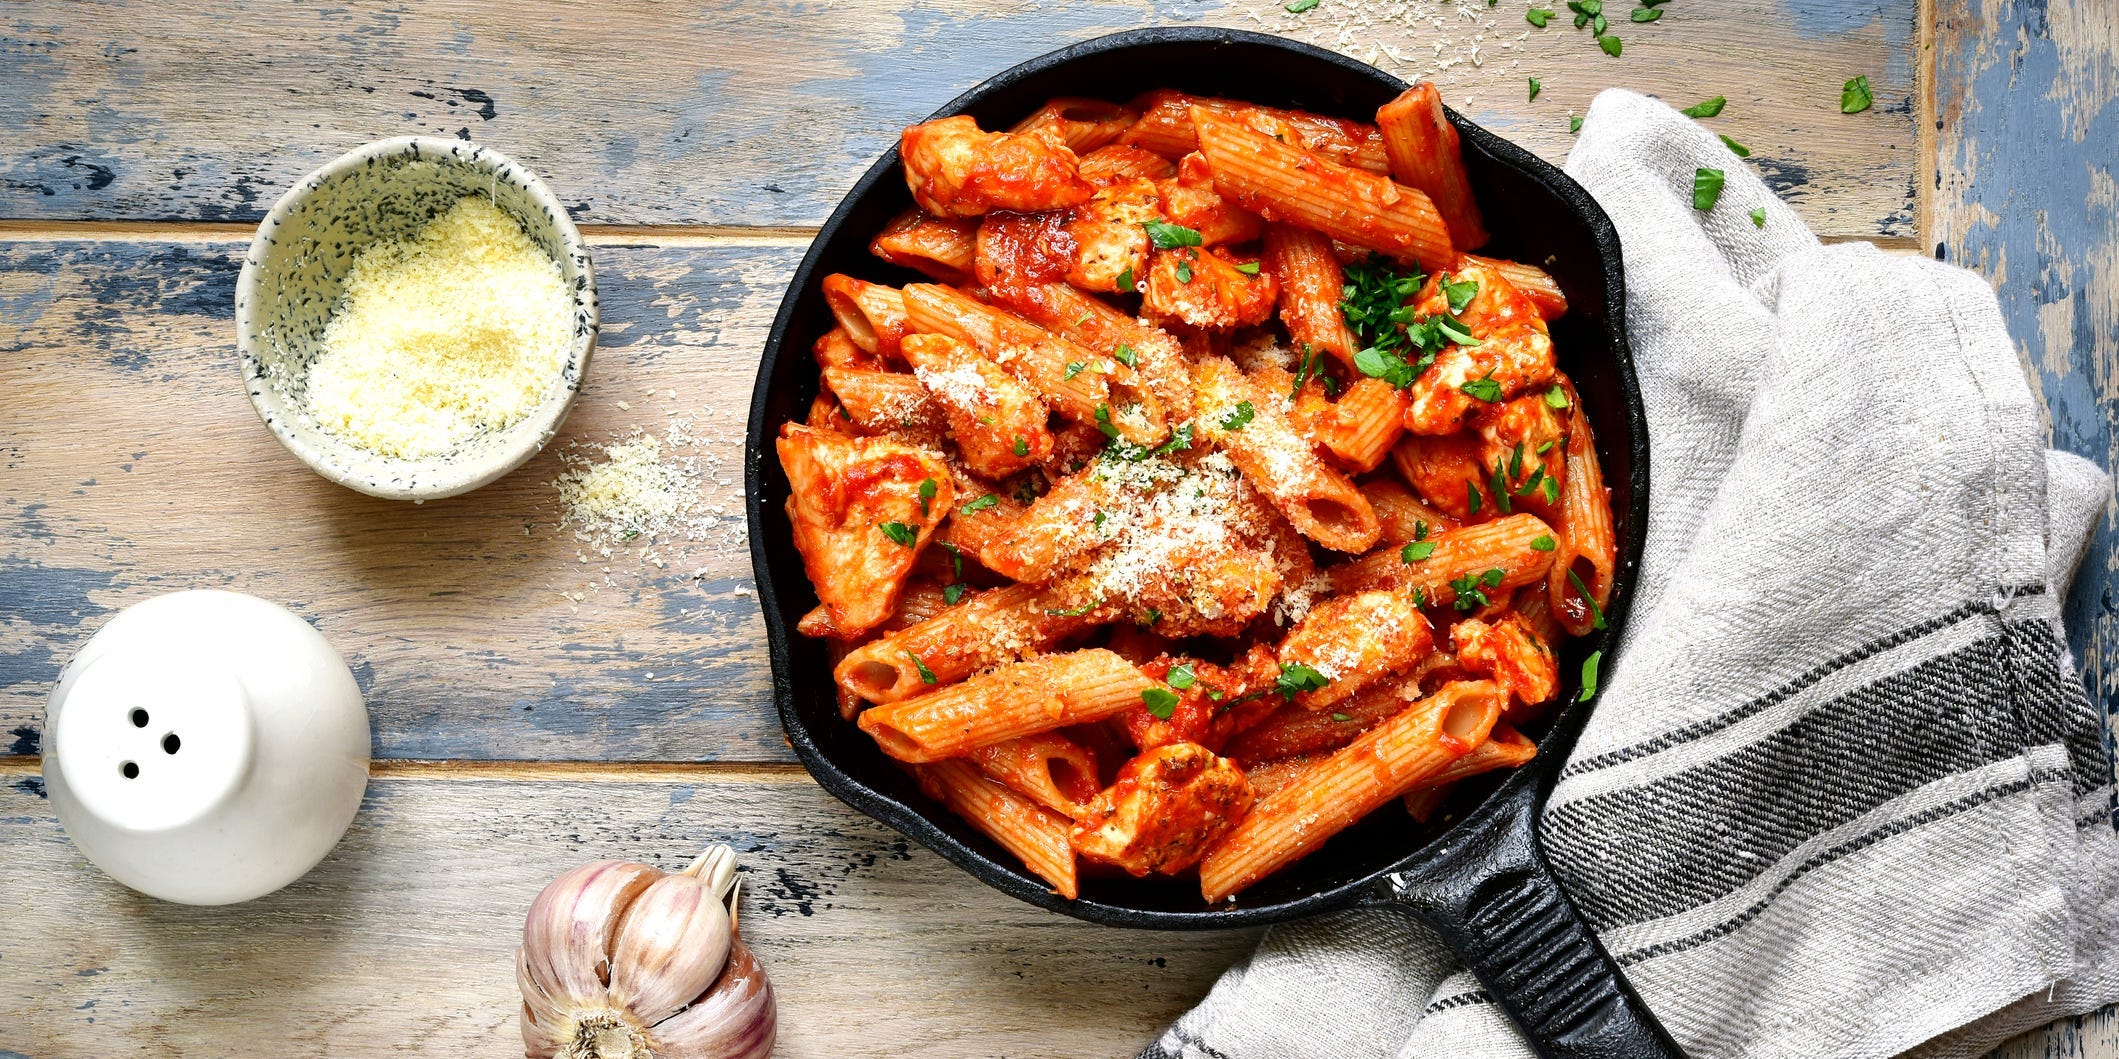 A cast iron skillet filled with whole wheat pasta, fresh garlic and herbs, and pasta sauce.